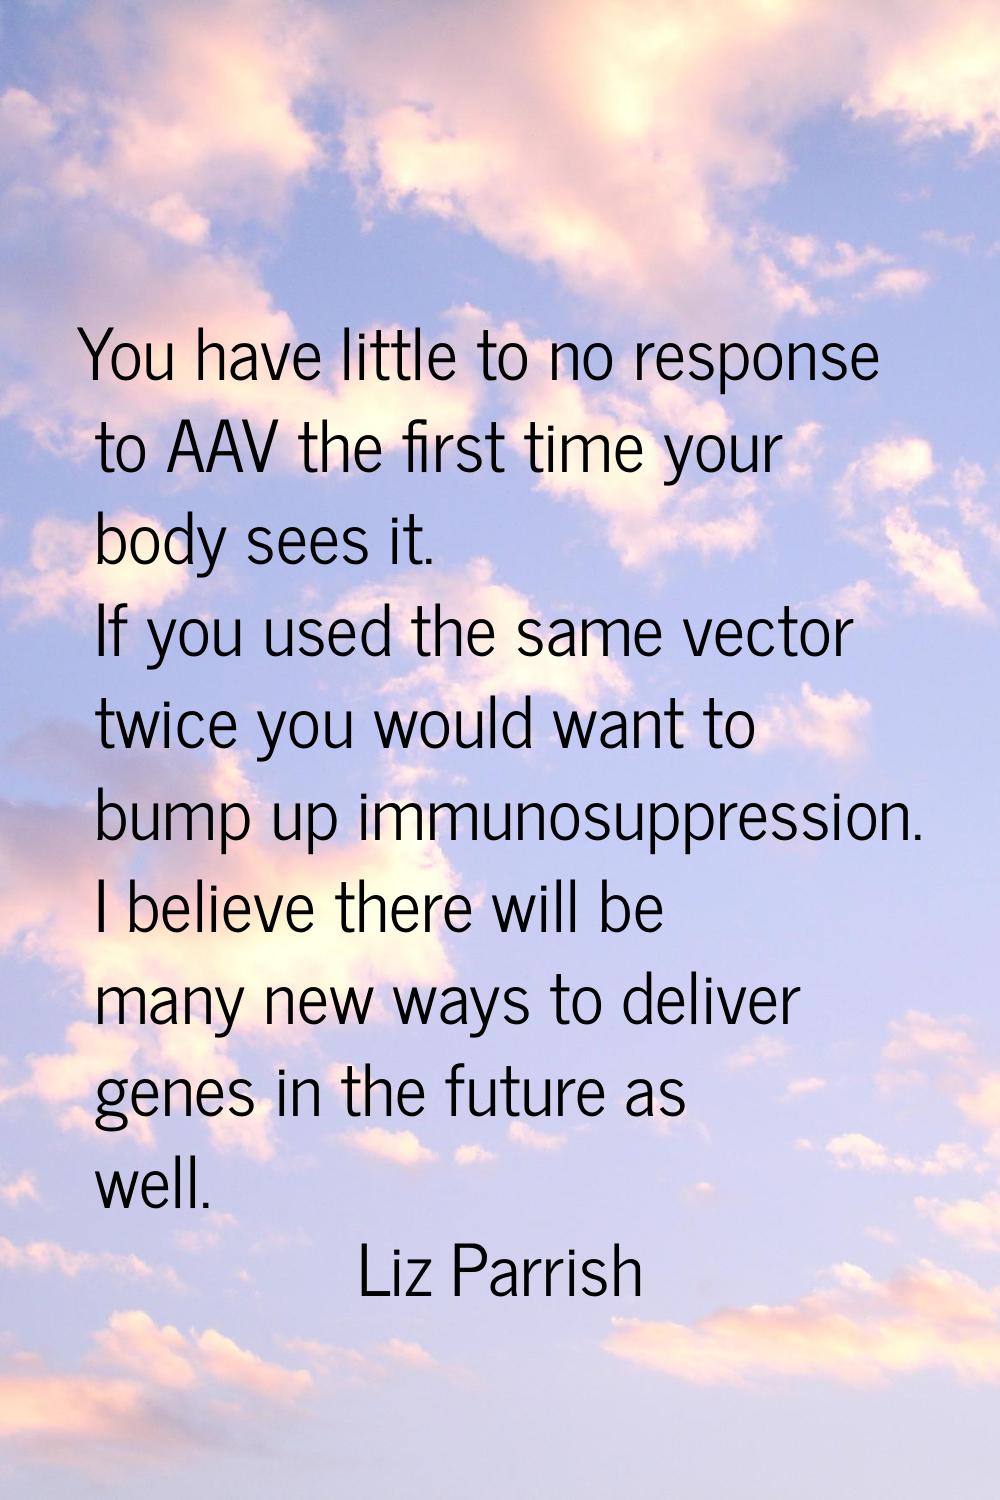 You have little to no response to AAV the first time your body sees it. If you used the same vector